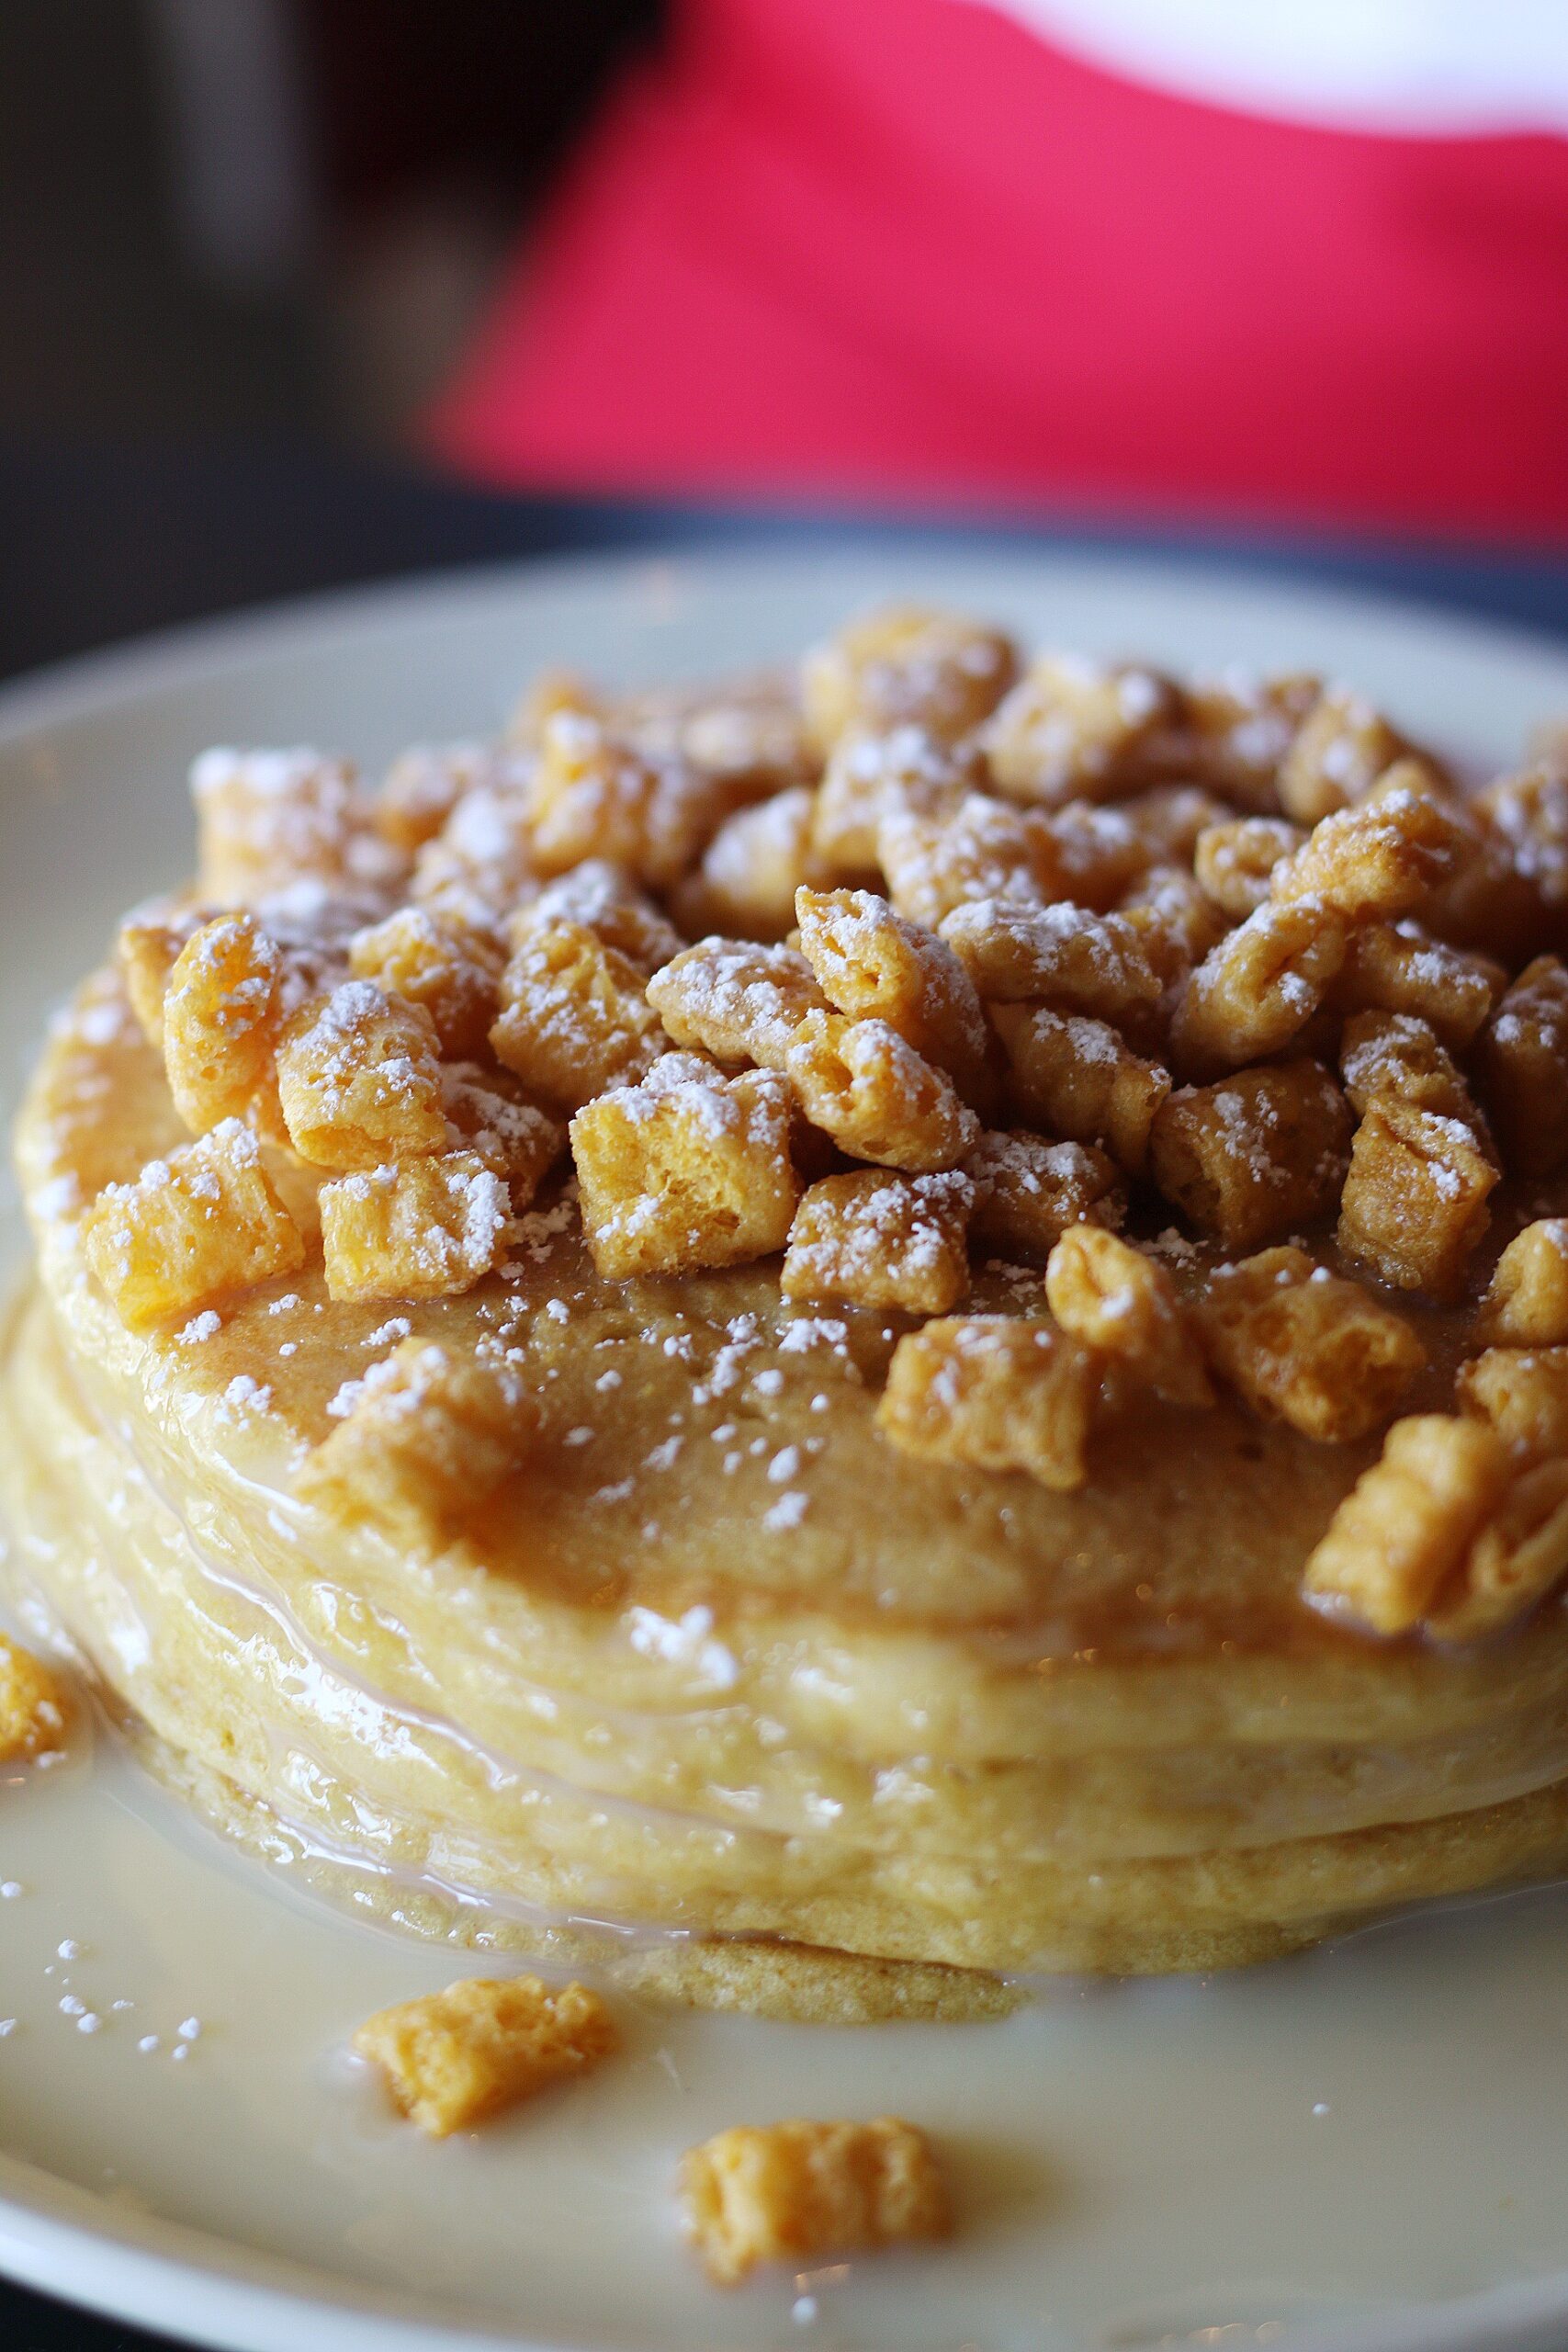 For the best pancakes in Miami make reservations at Eating House in Coral Gables